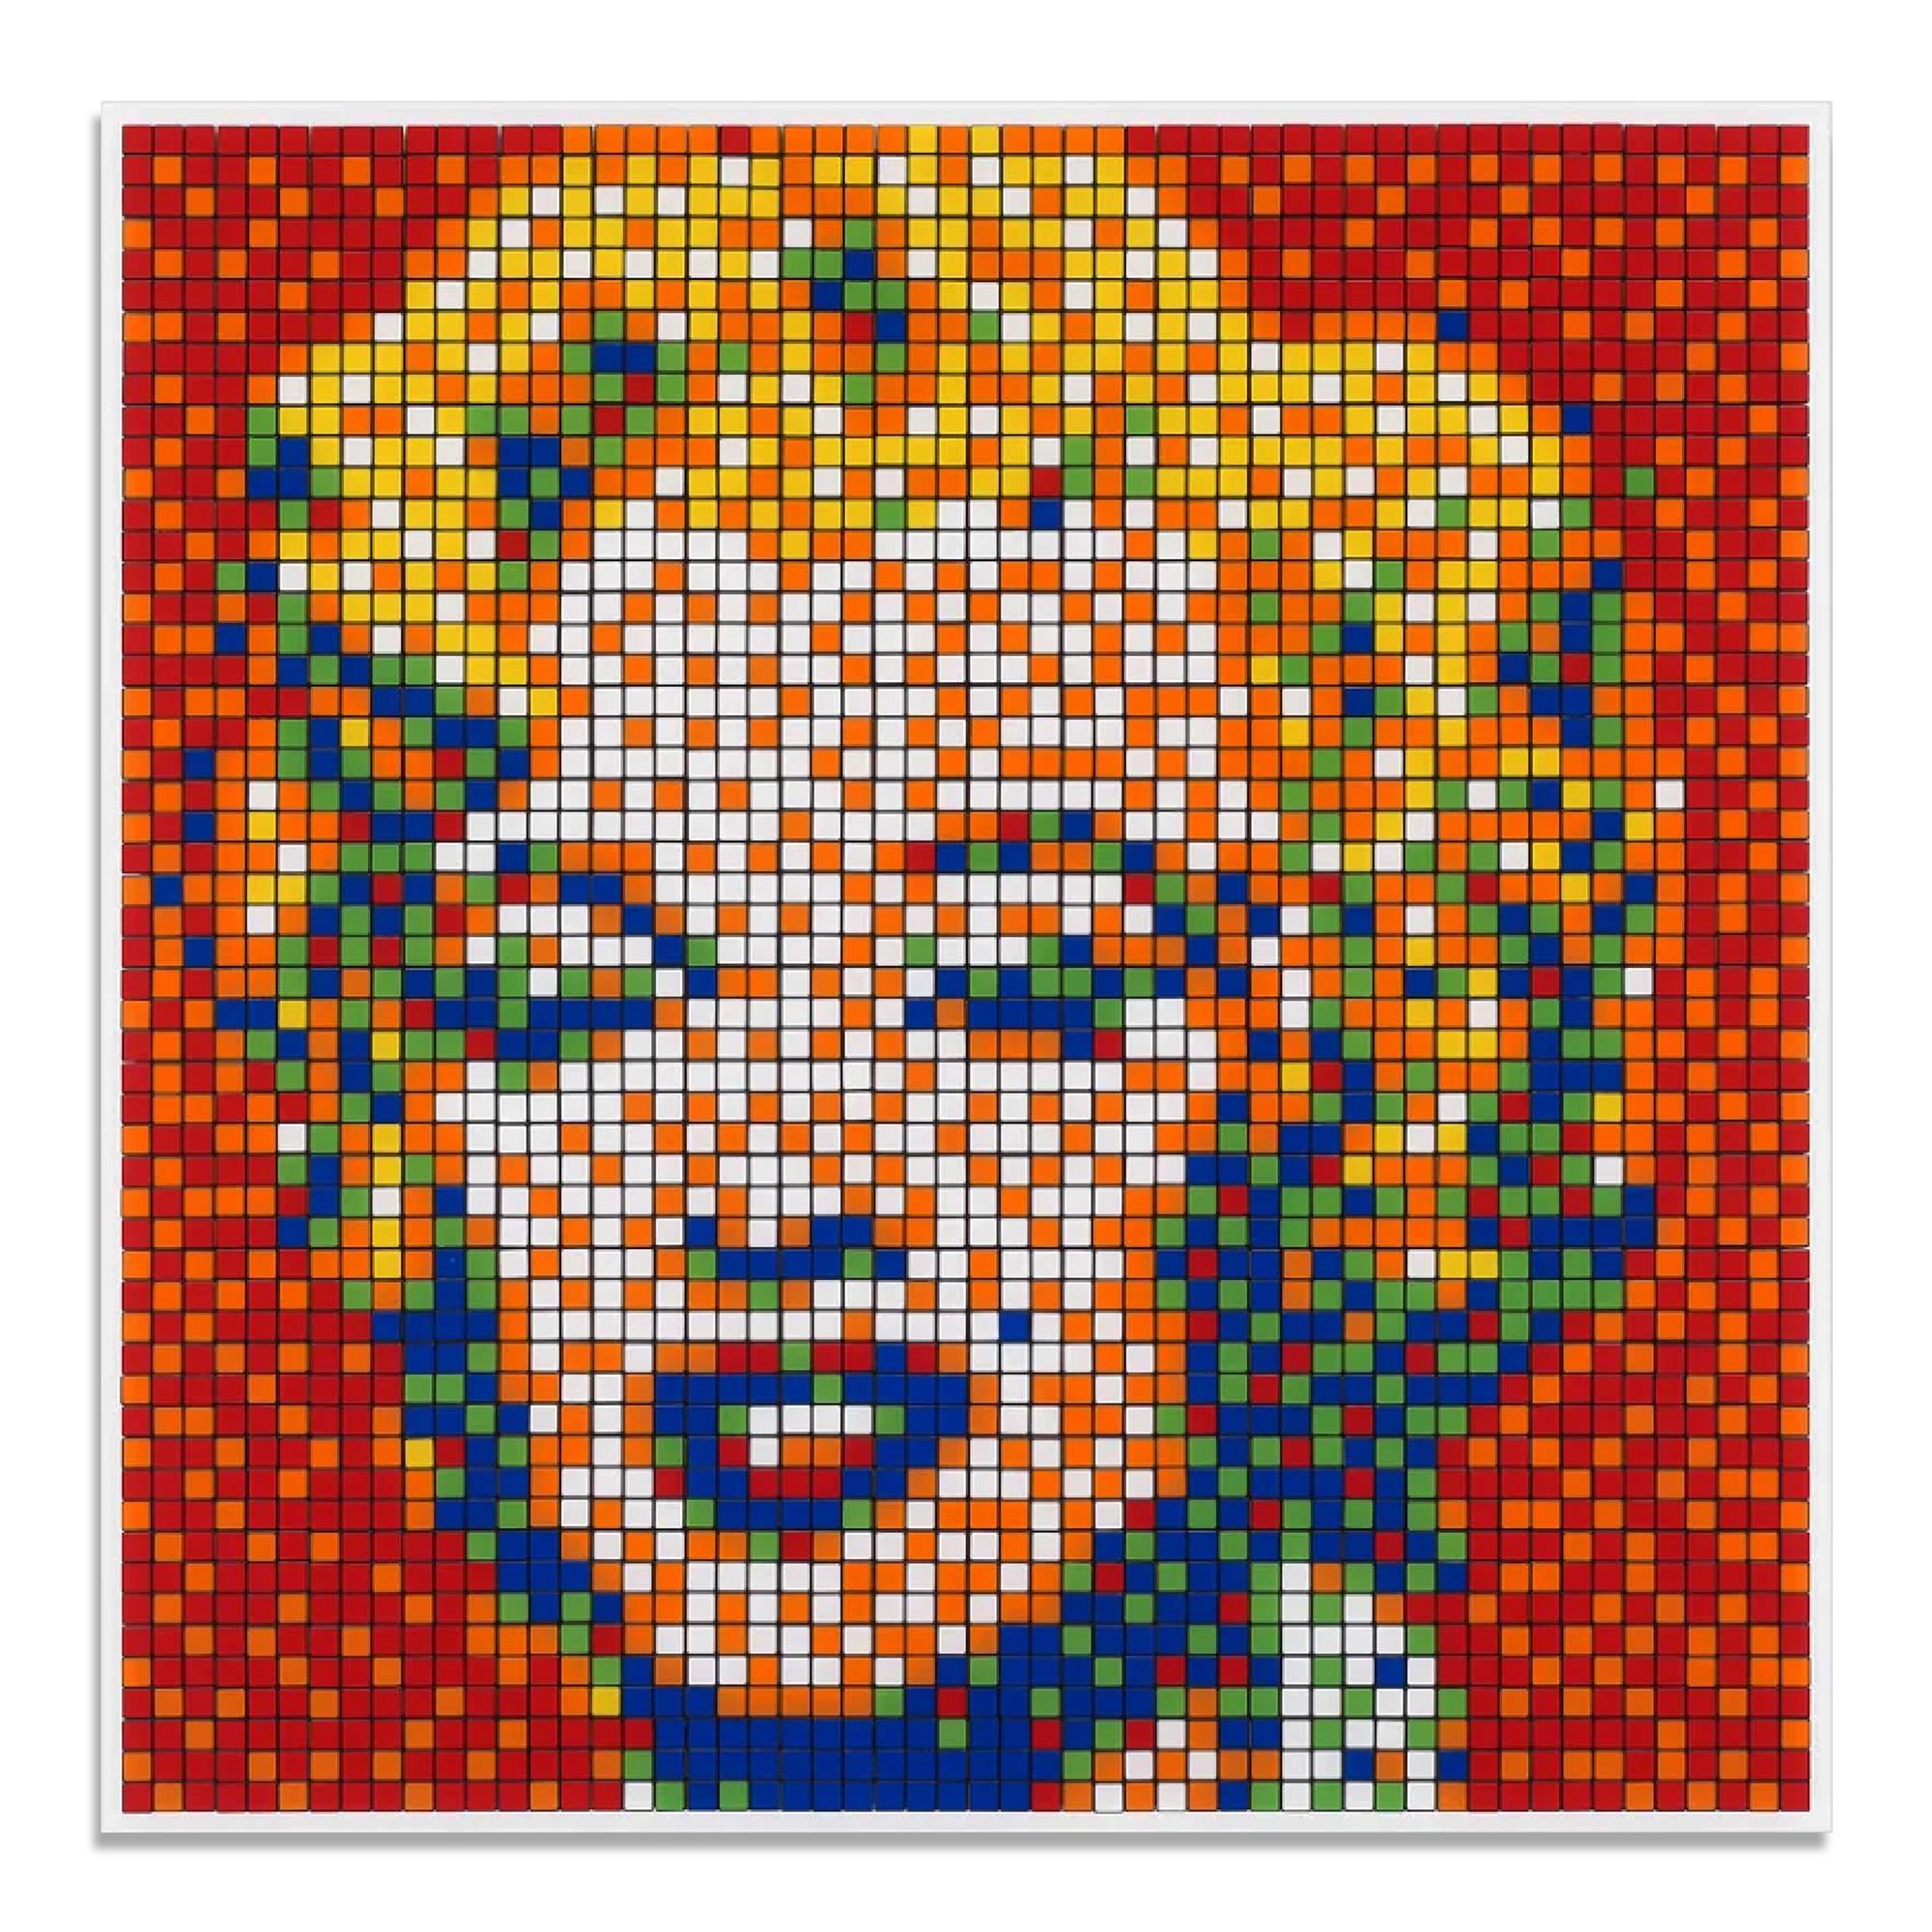 Invader (French, b. 1969)
Rubik Shot Red Marilyn (NVDR1-4), 2023
Medium: Giclée print on aluminum composite panel with Diasec mounting
Dimensions: 100 x 100 cm (39 2/5 × 39 2/5 in)
Edition of 774: Hand-signed and numbered on label affixed to